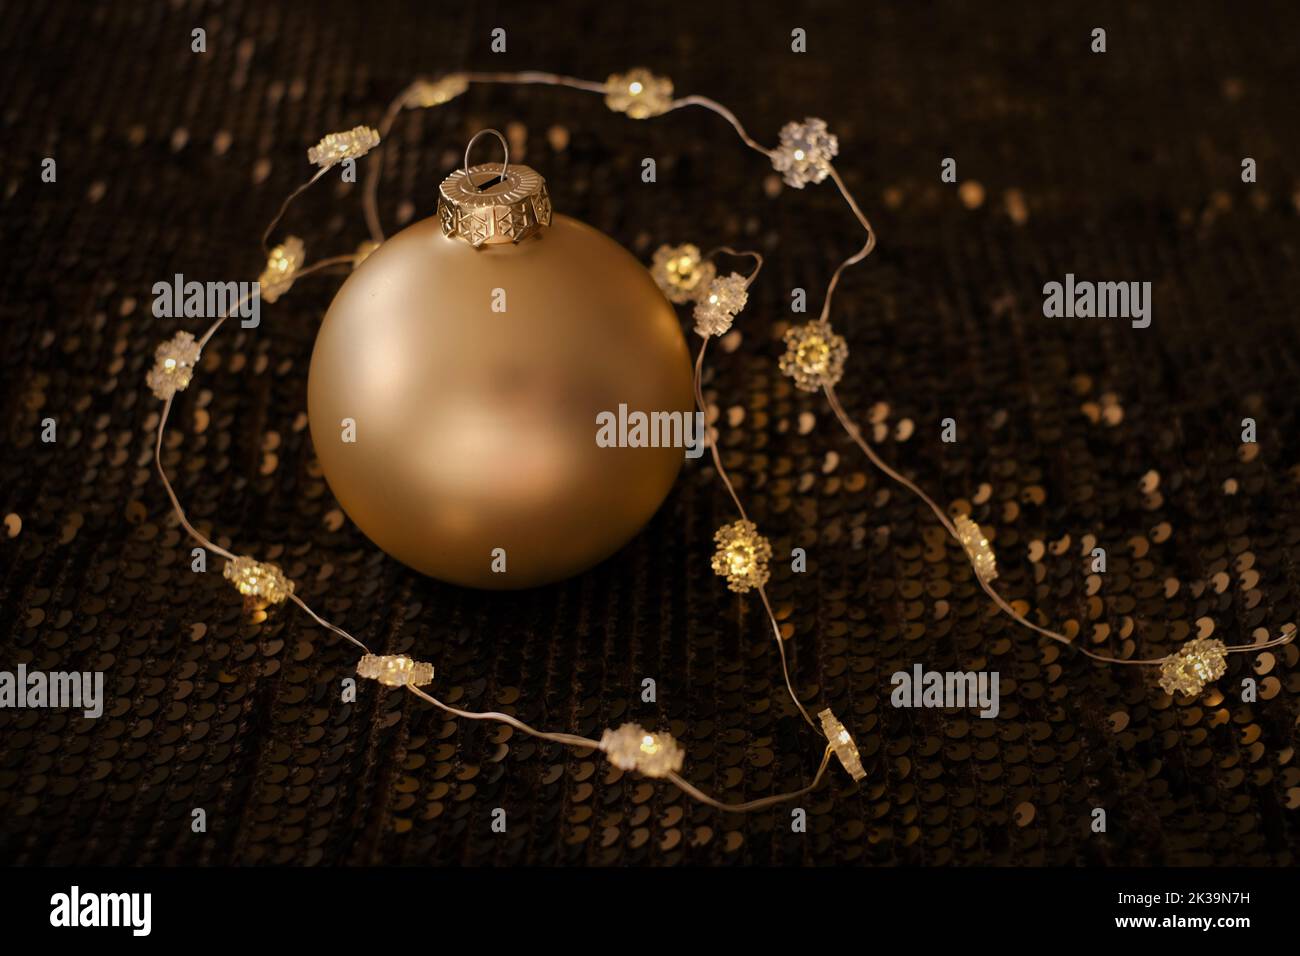 Golden balls and glowing garlands on brown sequins background.Christmas balls background.Festive background in Gold and brown tones. Stock Photo